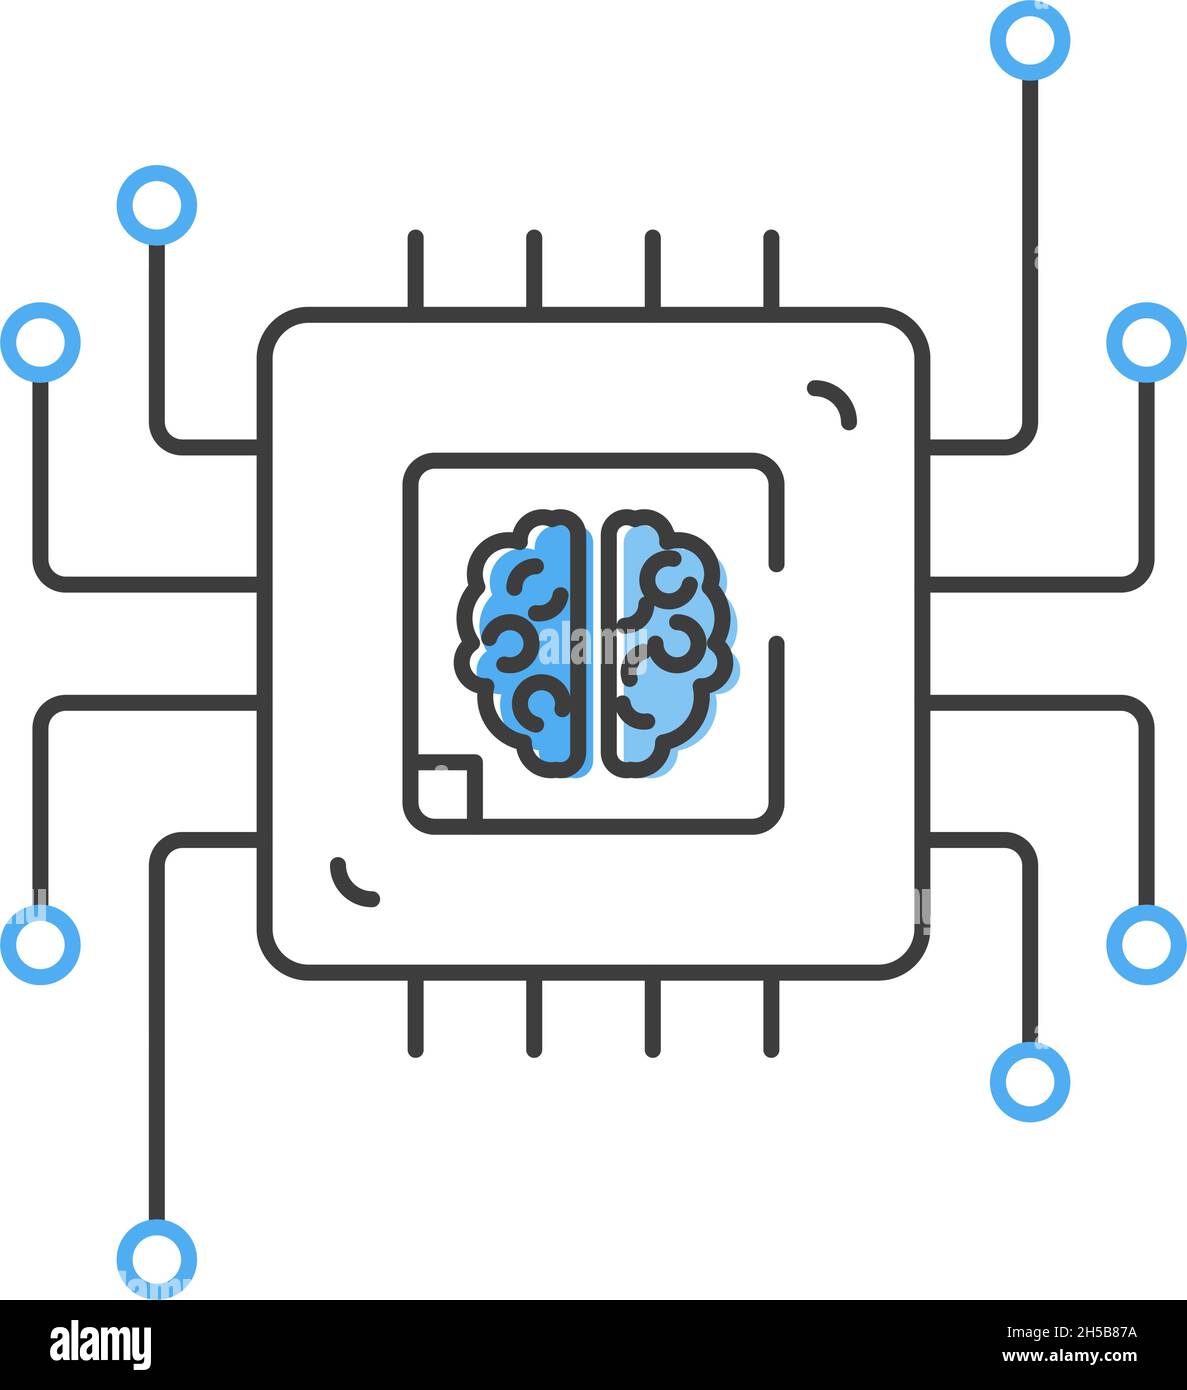 Human brain inside a CPU computer chip. AI or Artificial Intelligence concept. Flat style icon. Isolated. Stock Vector